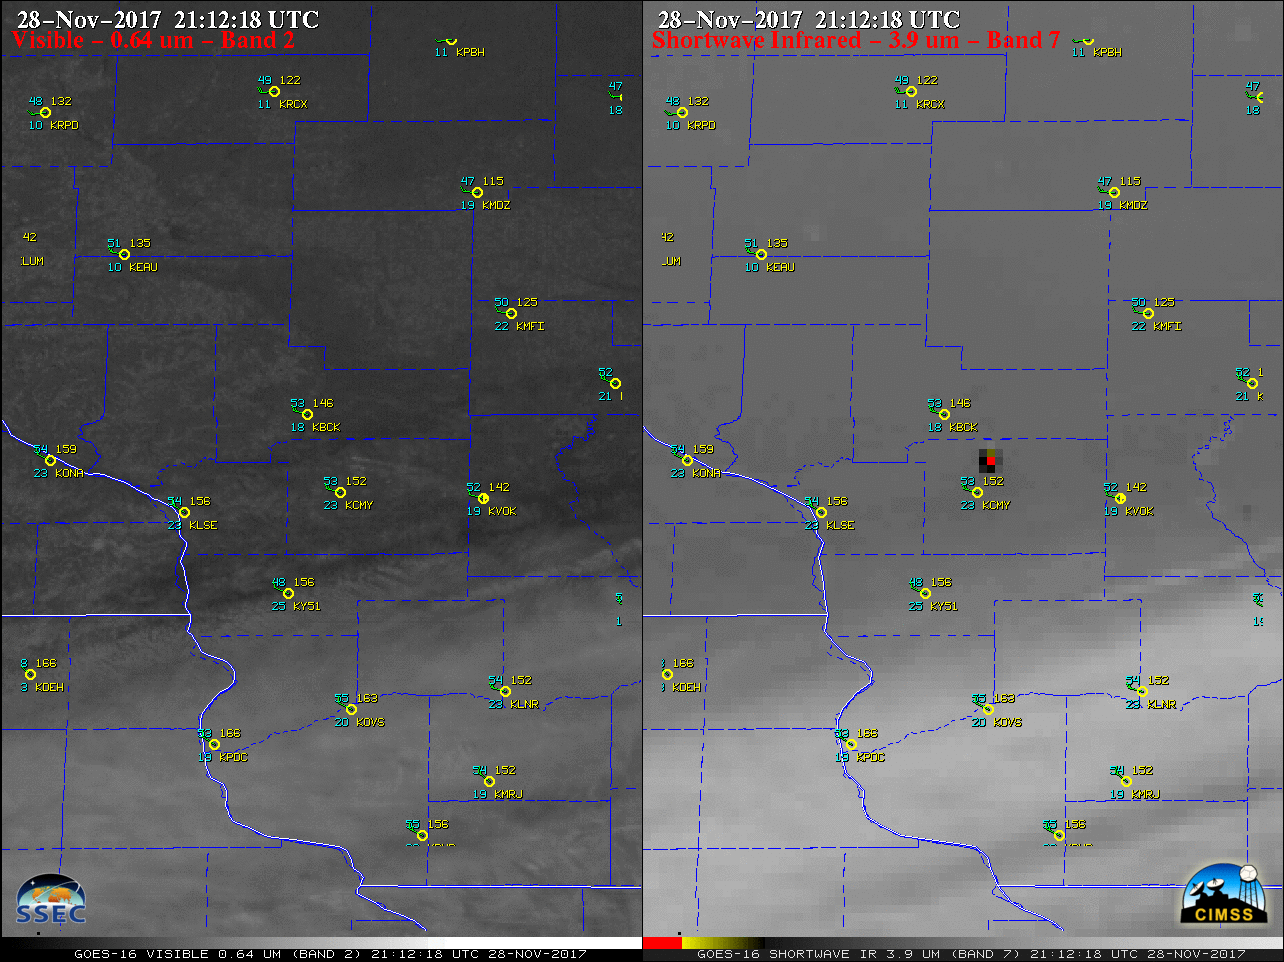 GOES-16 Visible (0.64 µm, left) and Shortwave Infrared (3.9 µm, right) images, with plots of hourly surface reports [click to play MP4 animation]